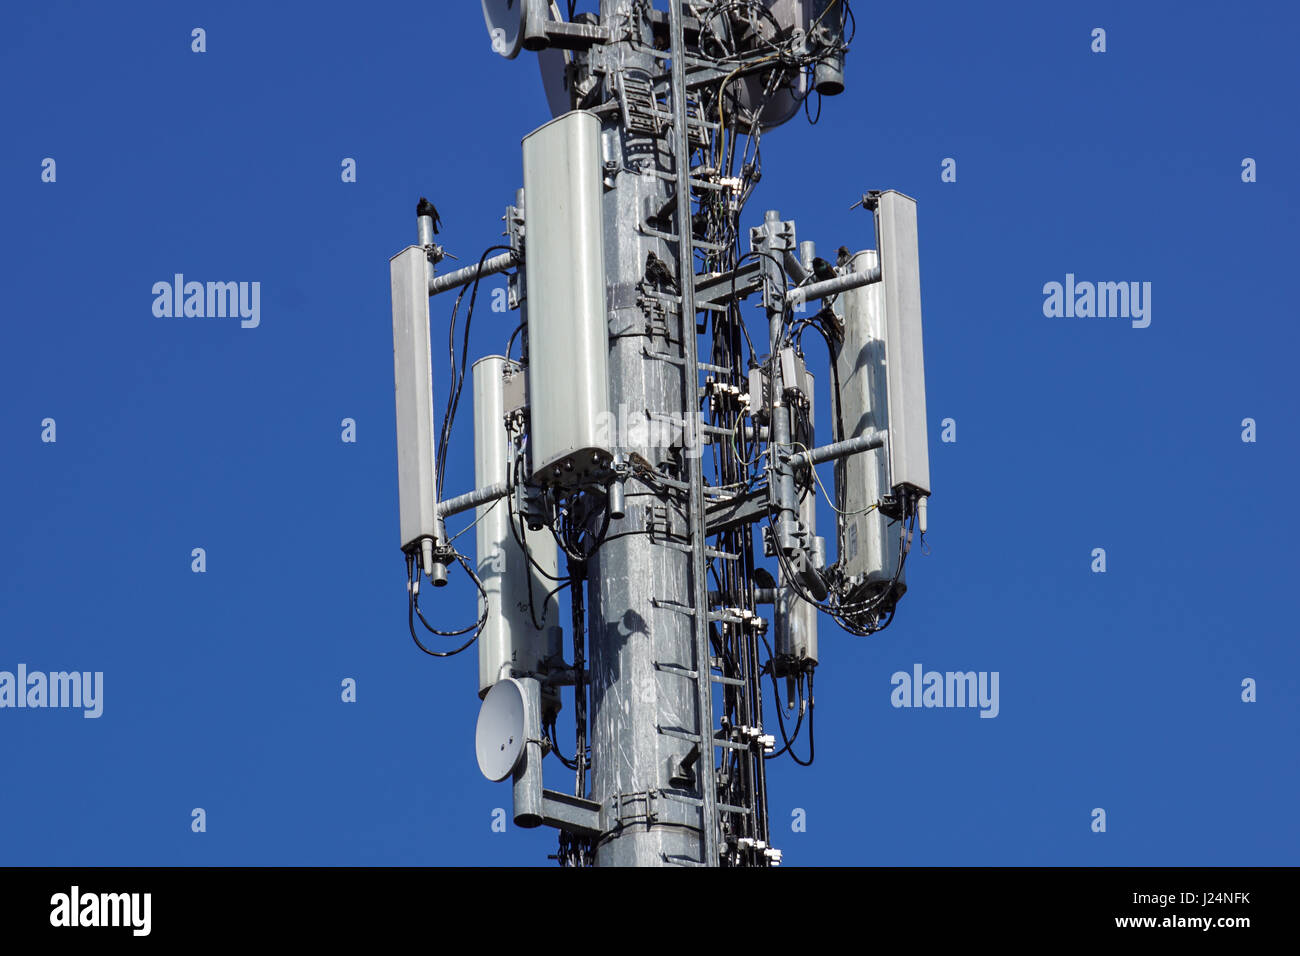 Telecommunications tower antenna cells for mobile communications. Stock Photo